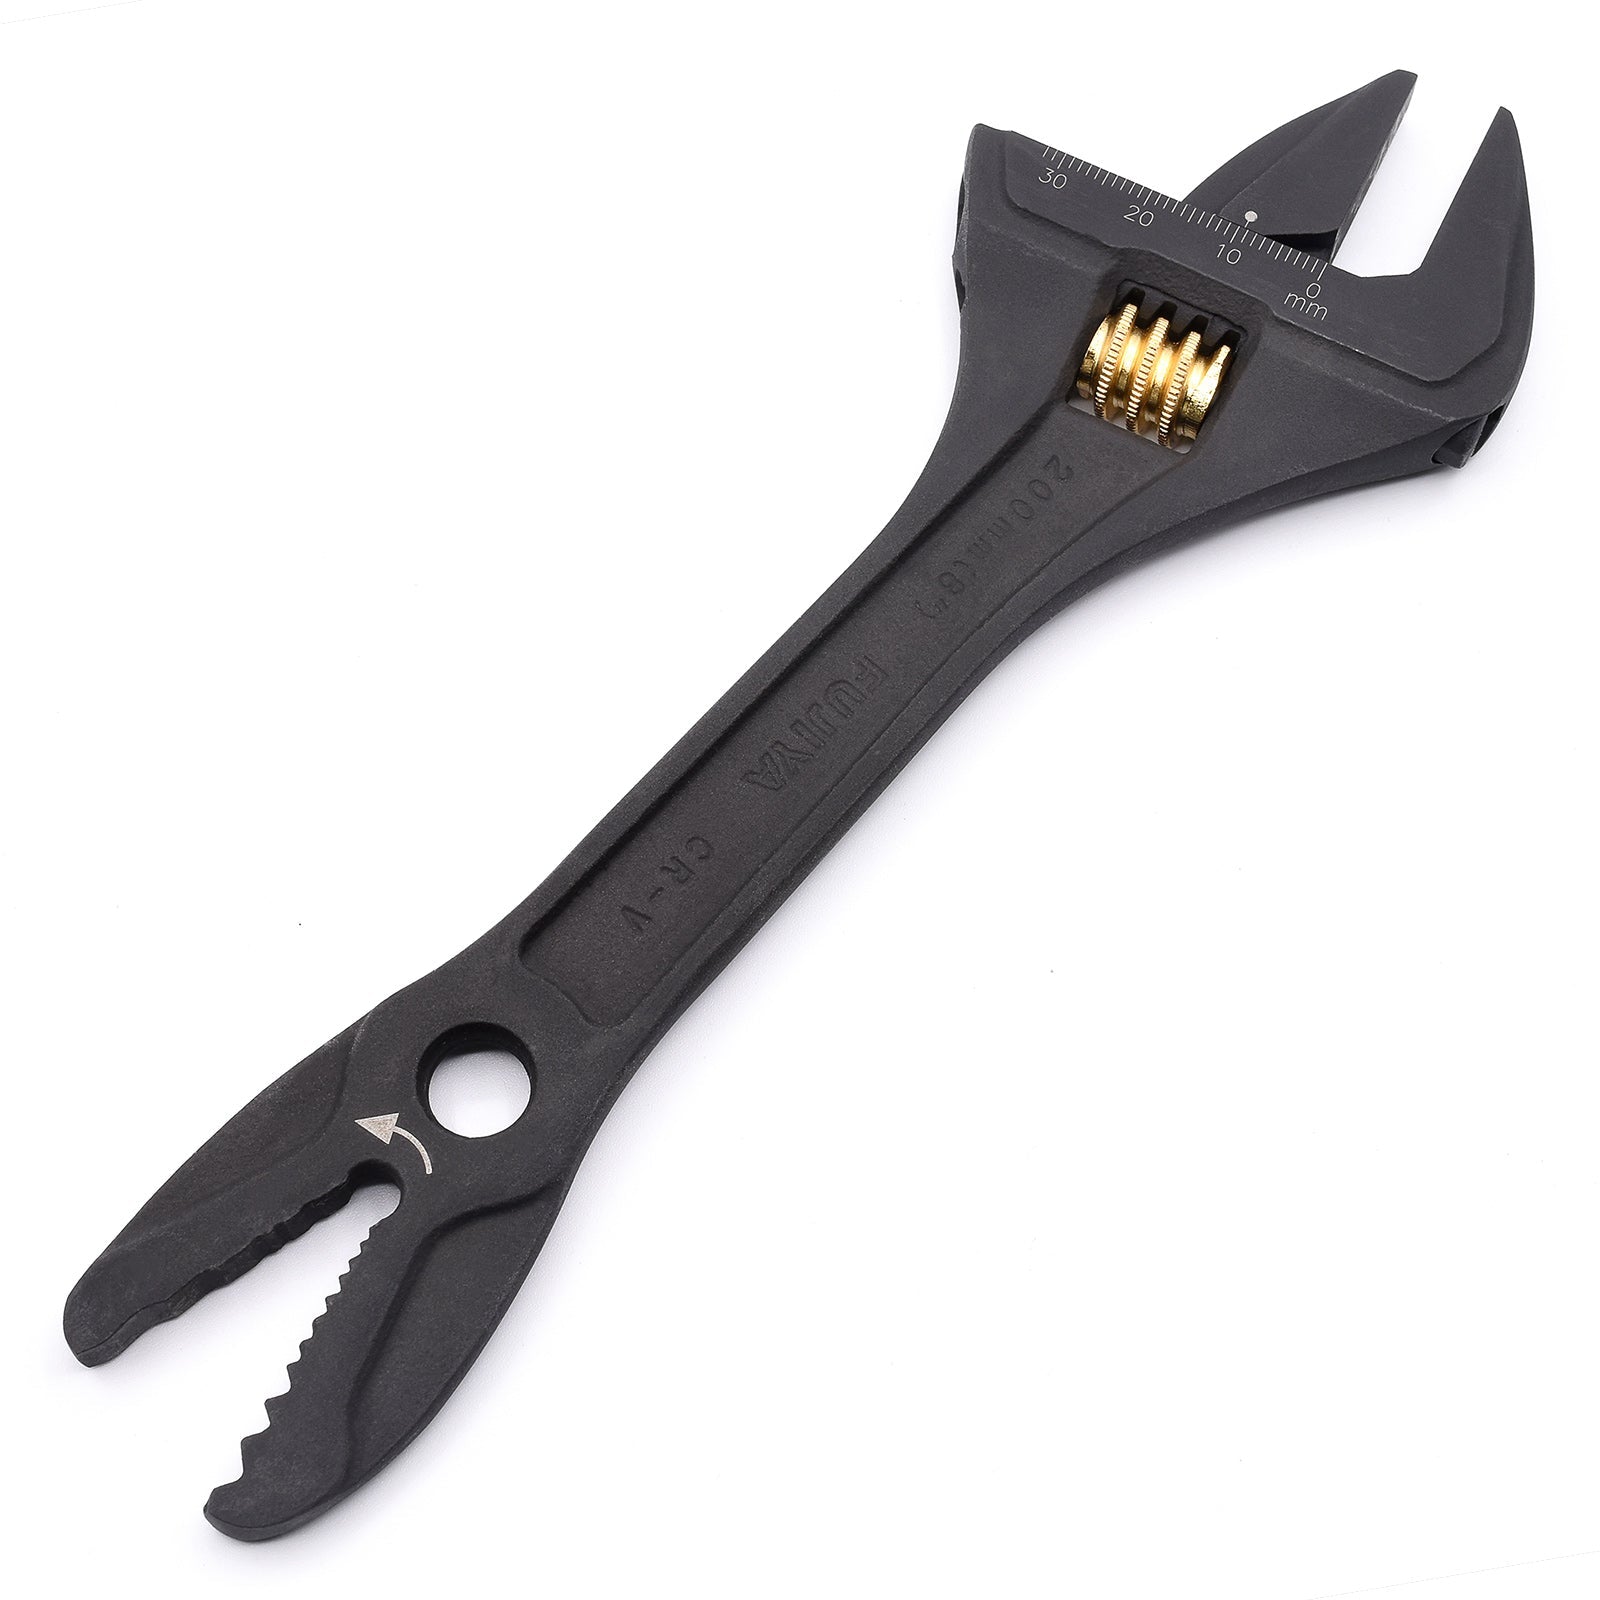 Fujiya 2 - in - 1 Adjustable Wrench with Quick Alligator Jaw